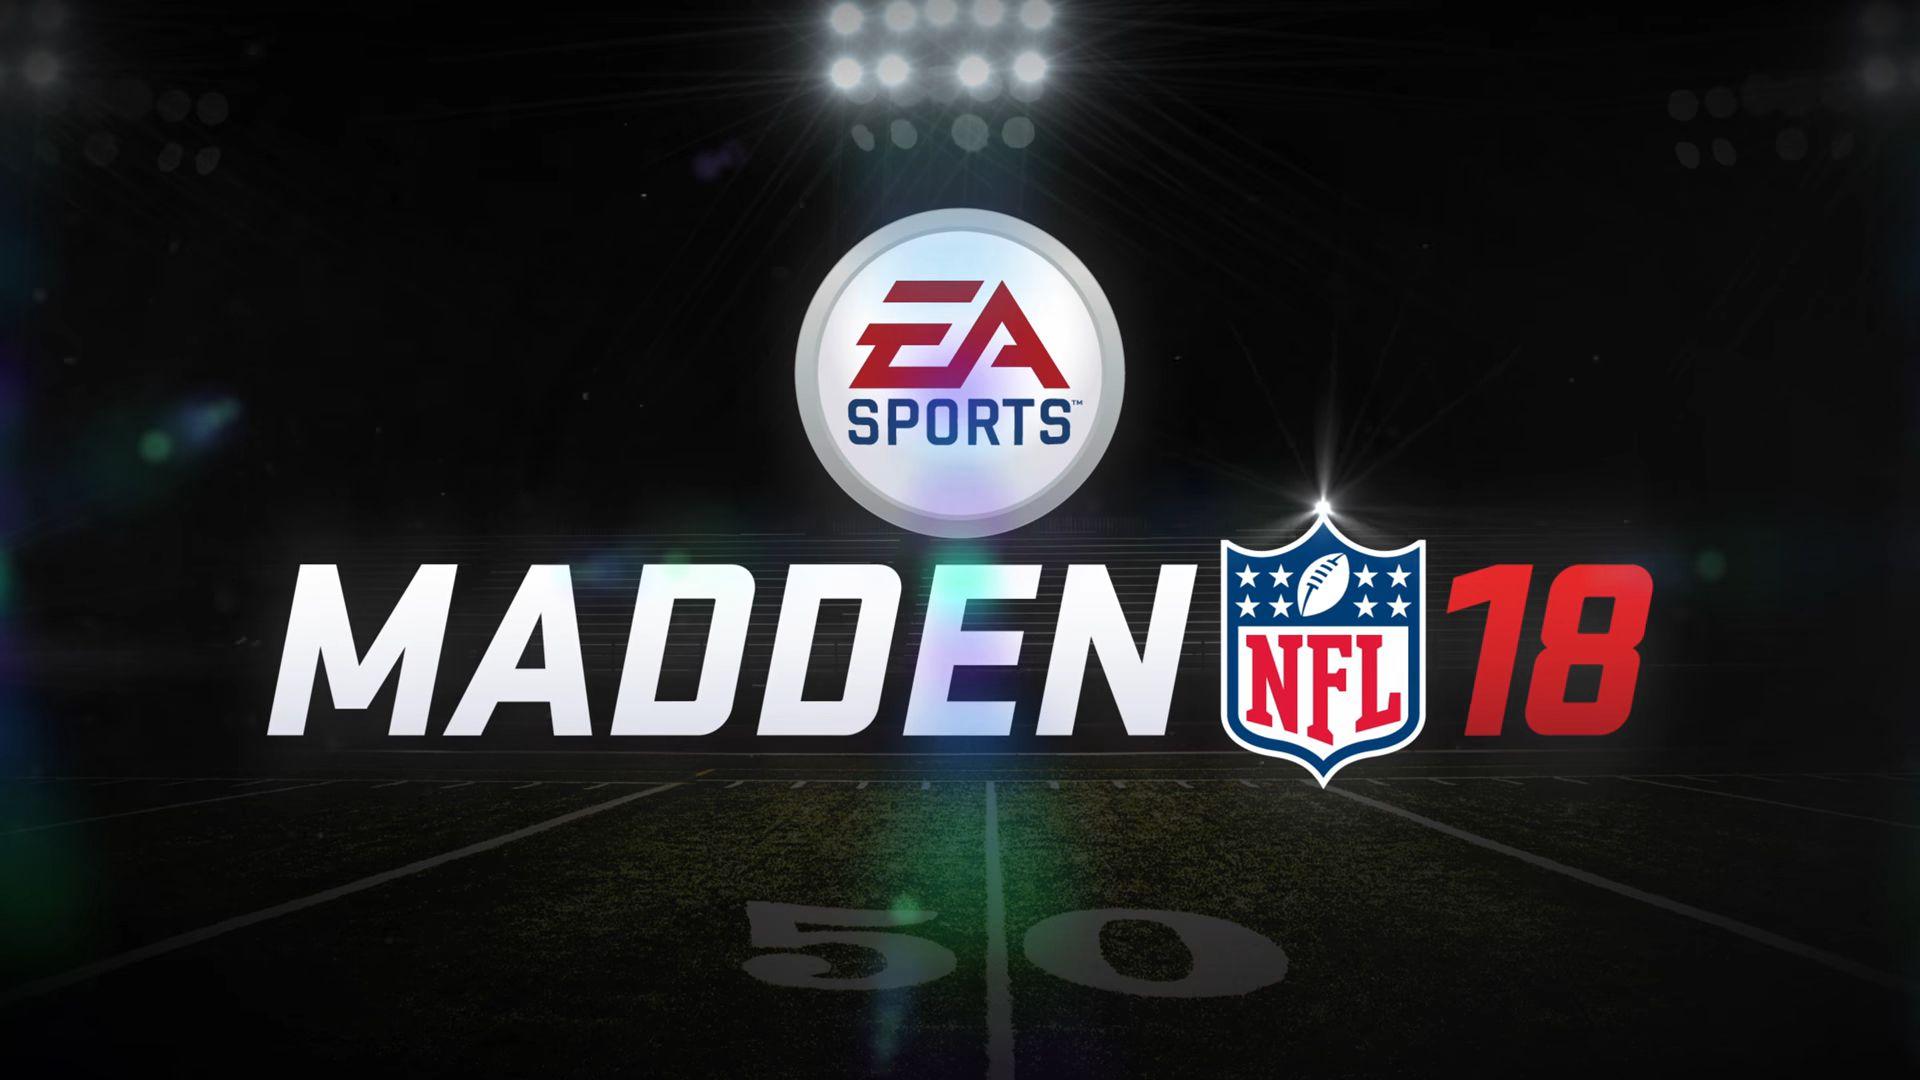 Madden NFL 18 shows off its enhancements in new trailer